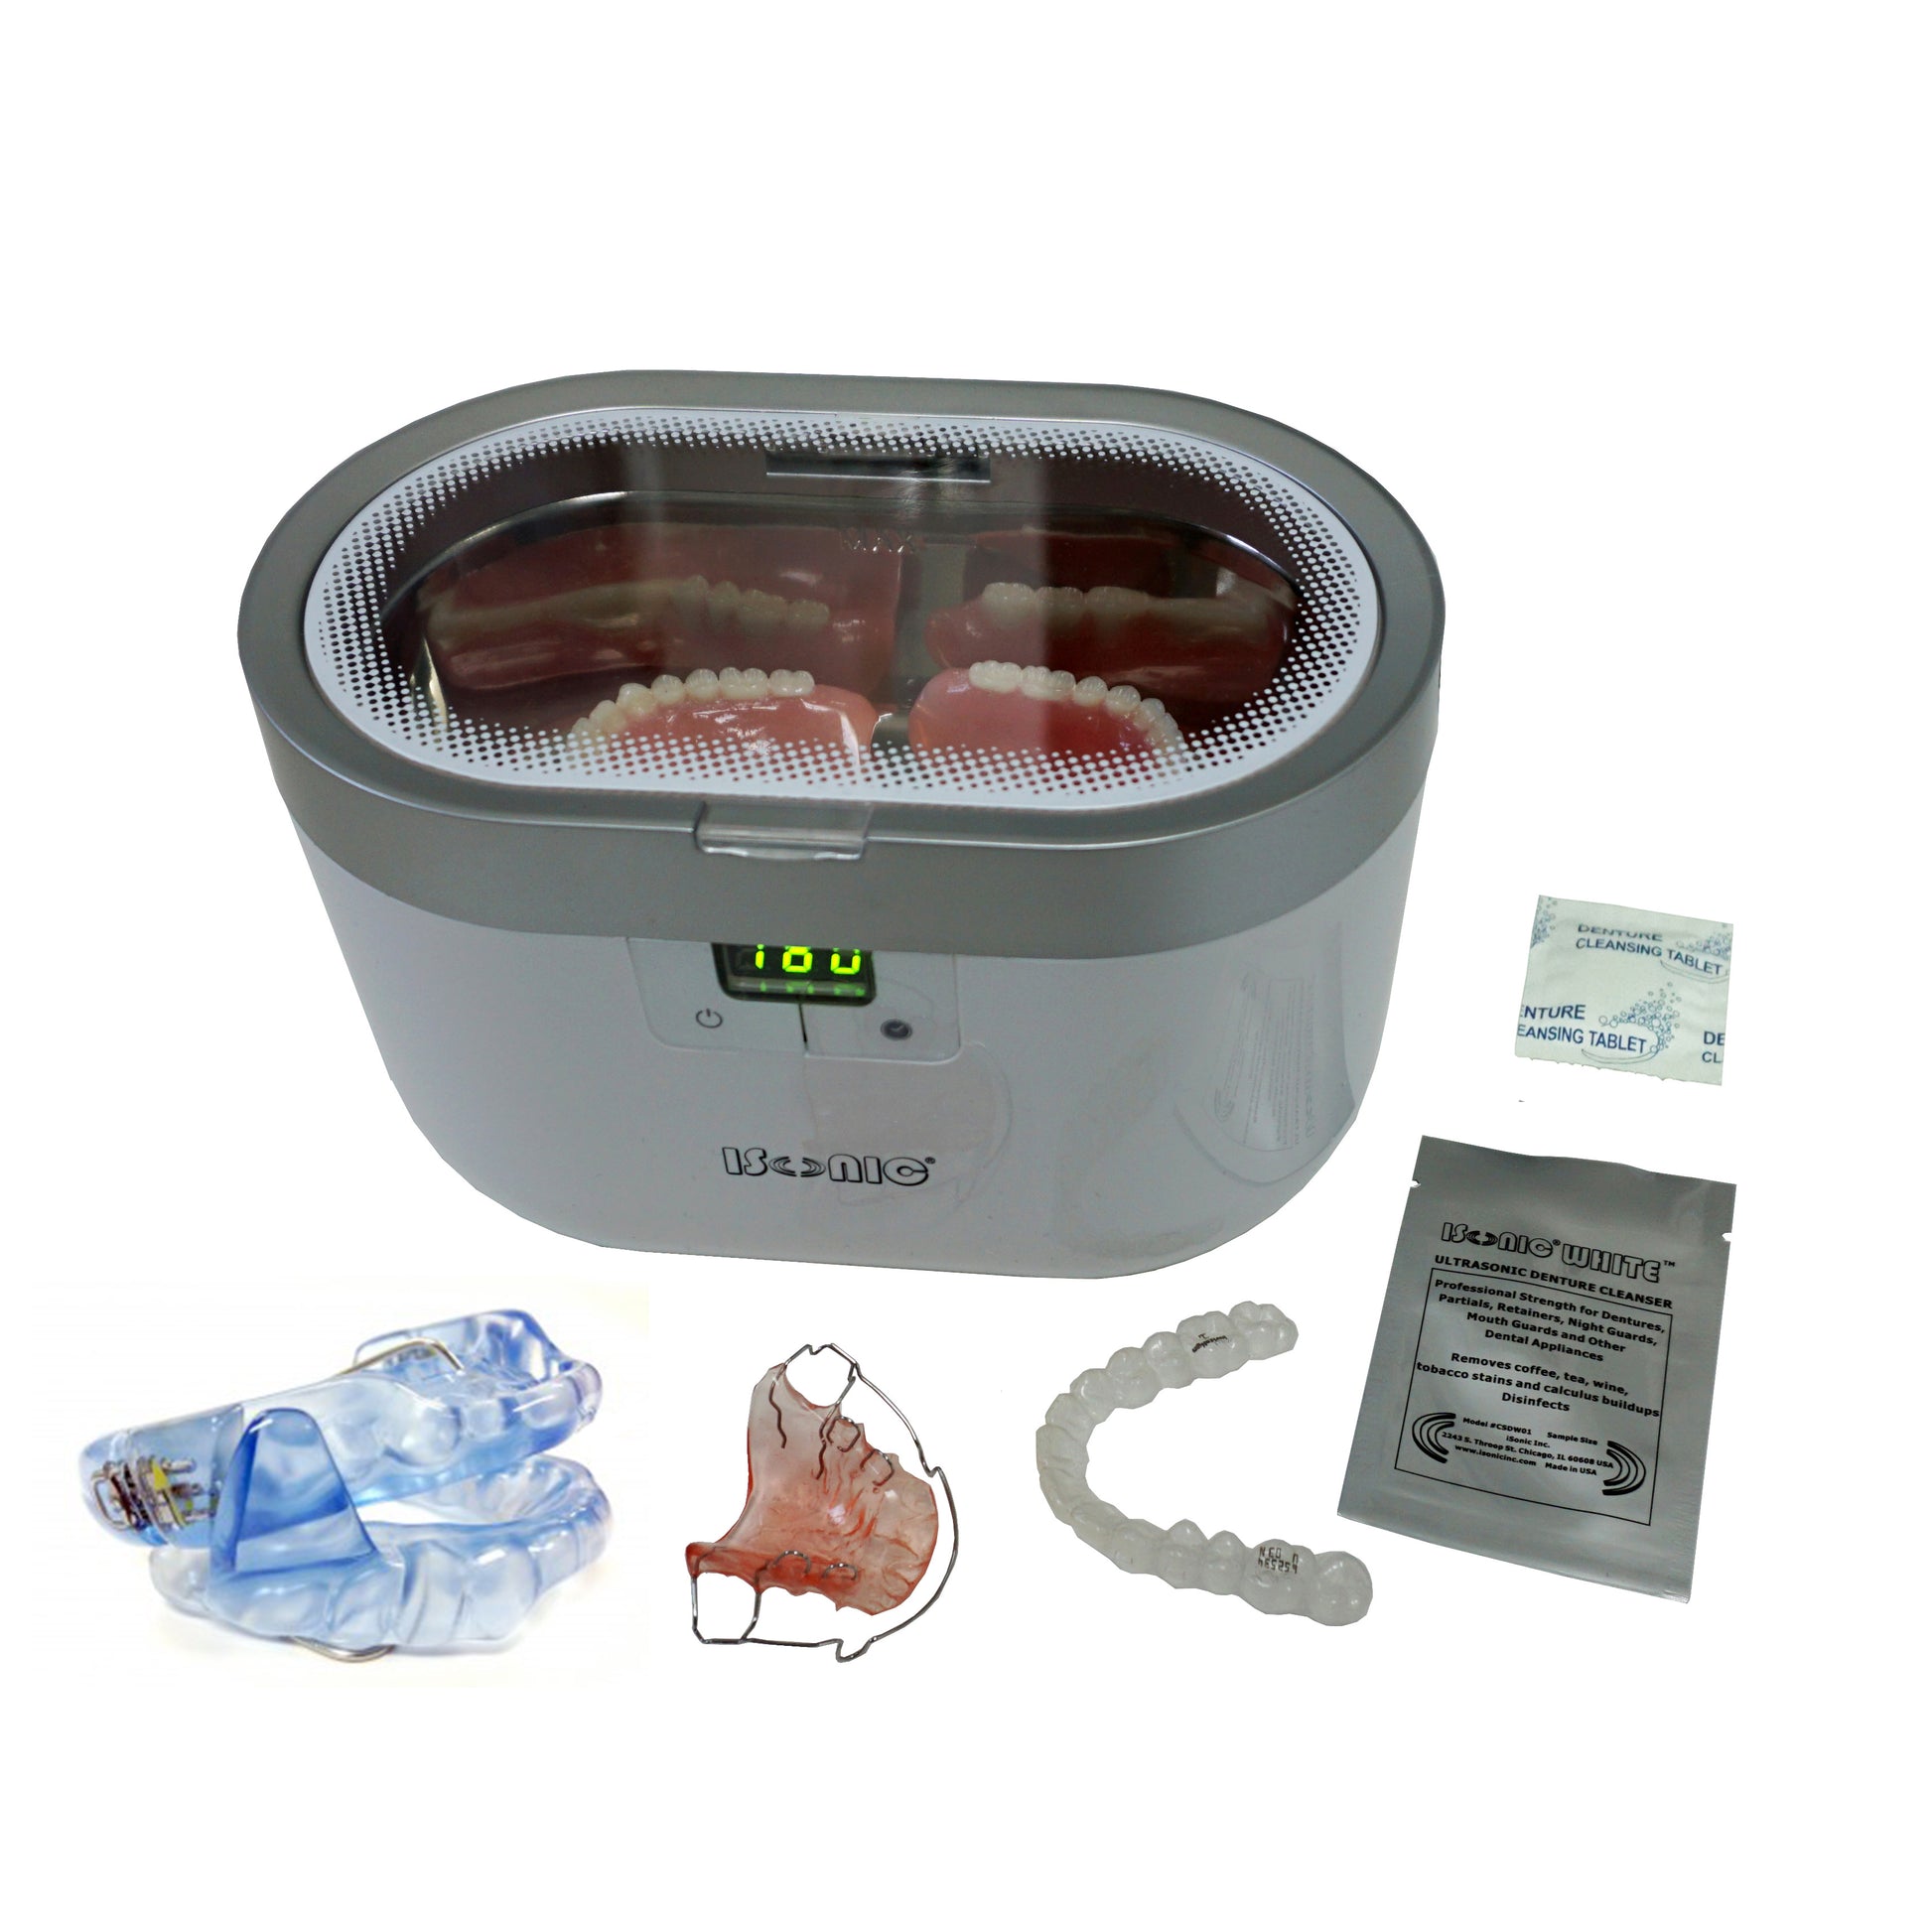 Ultrasonic Cleaner 30L Ultrasonic Cleaner for Cleaning Eyeglasses Dentures  Commercial Industrial Ultrasonic Cleaner with Digital Heater